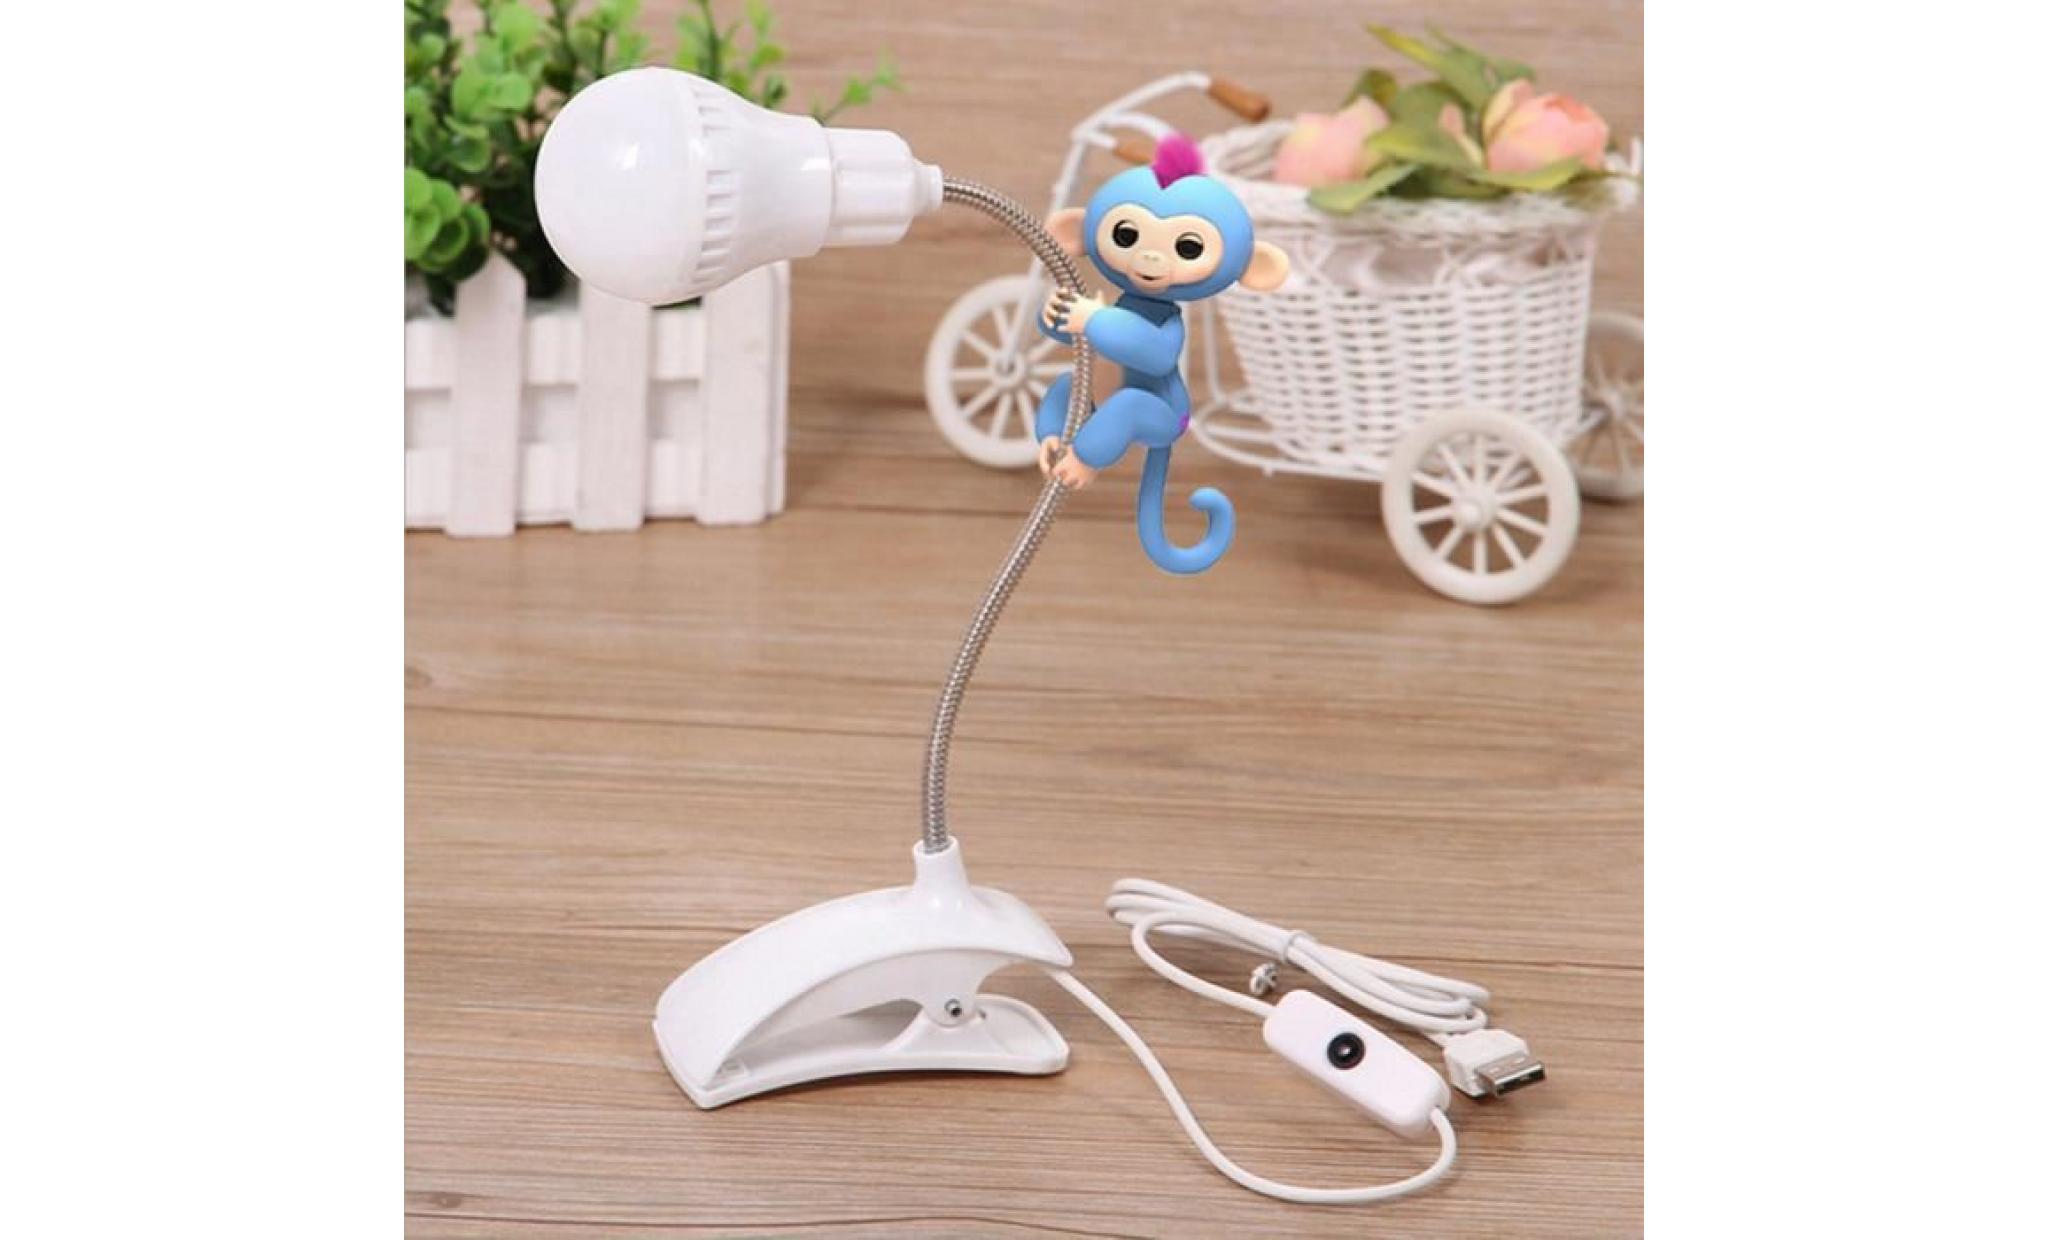 tube led new stand lampe de table usb étudiants étudiants lampe de lecture table desk lamp light wh 809 pas cher